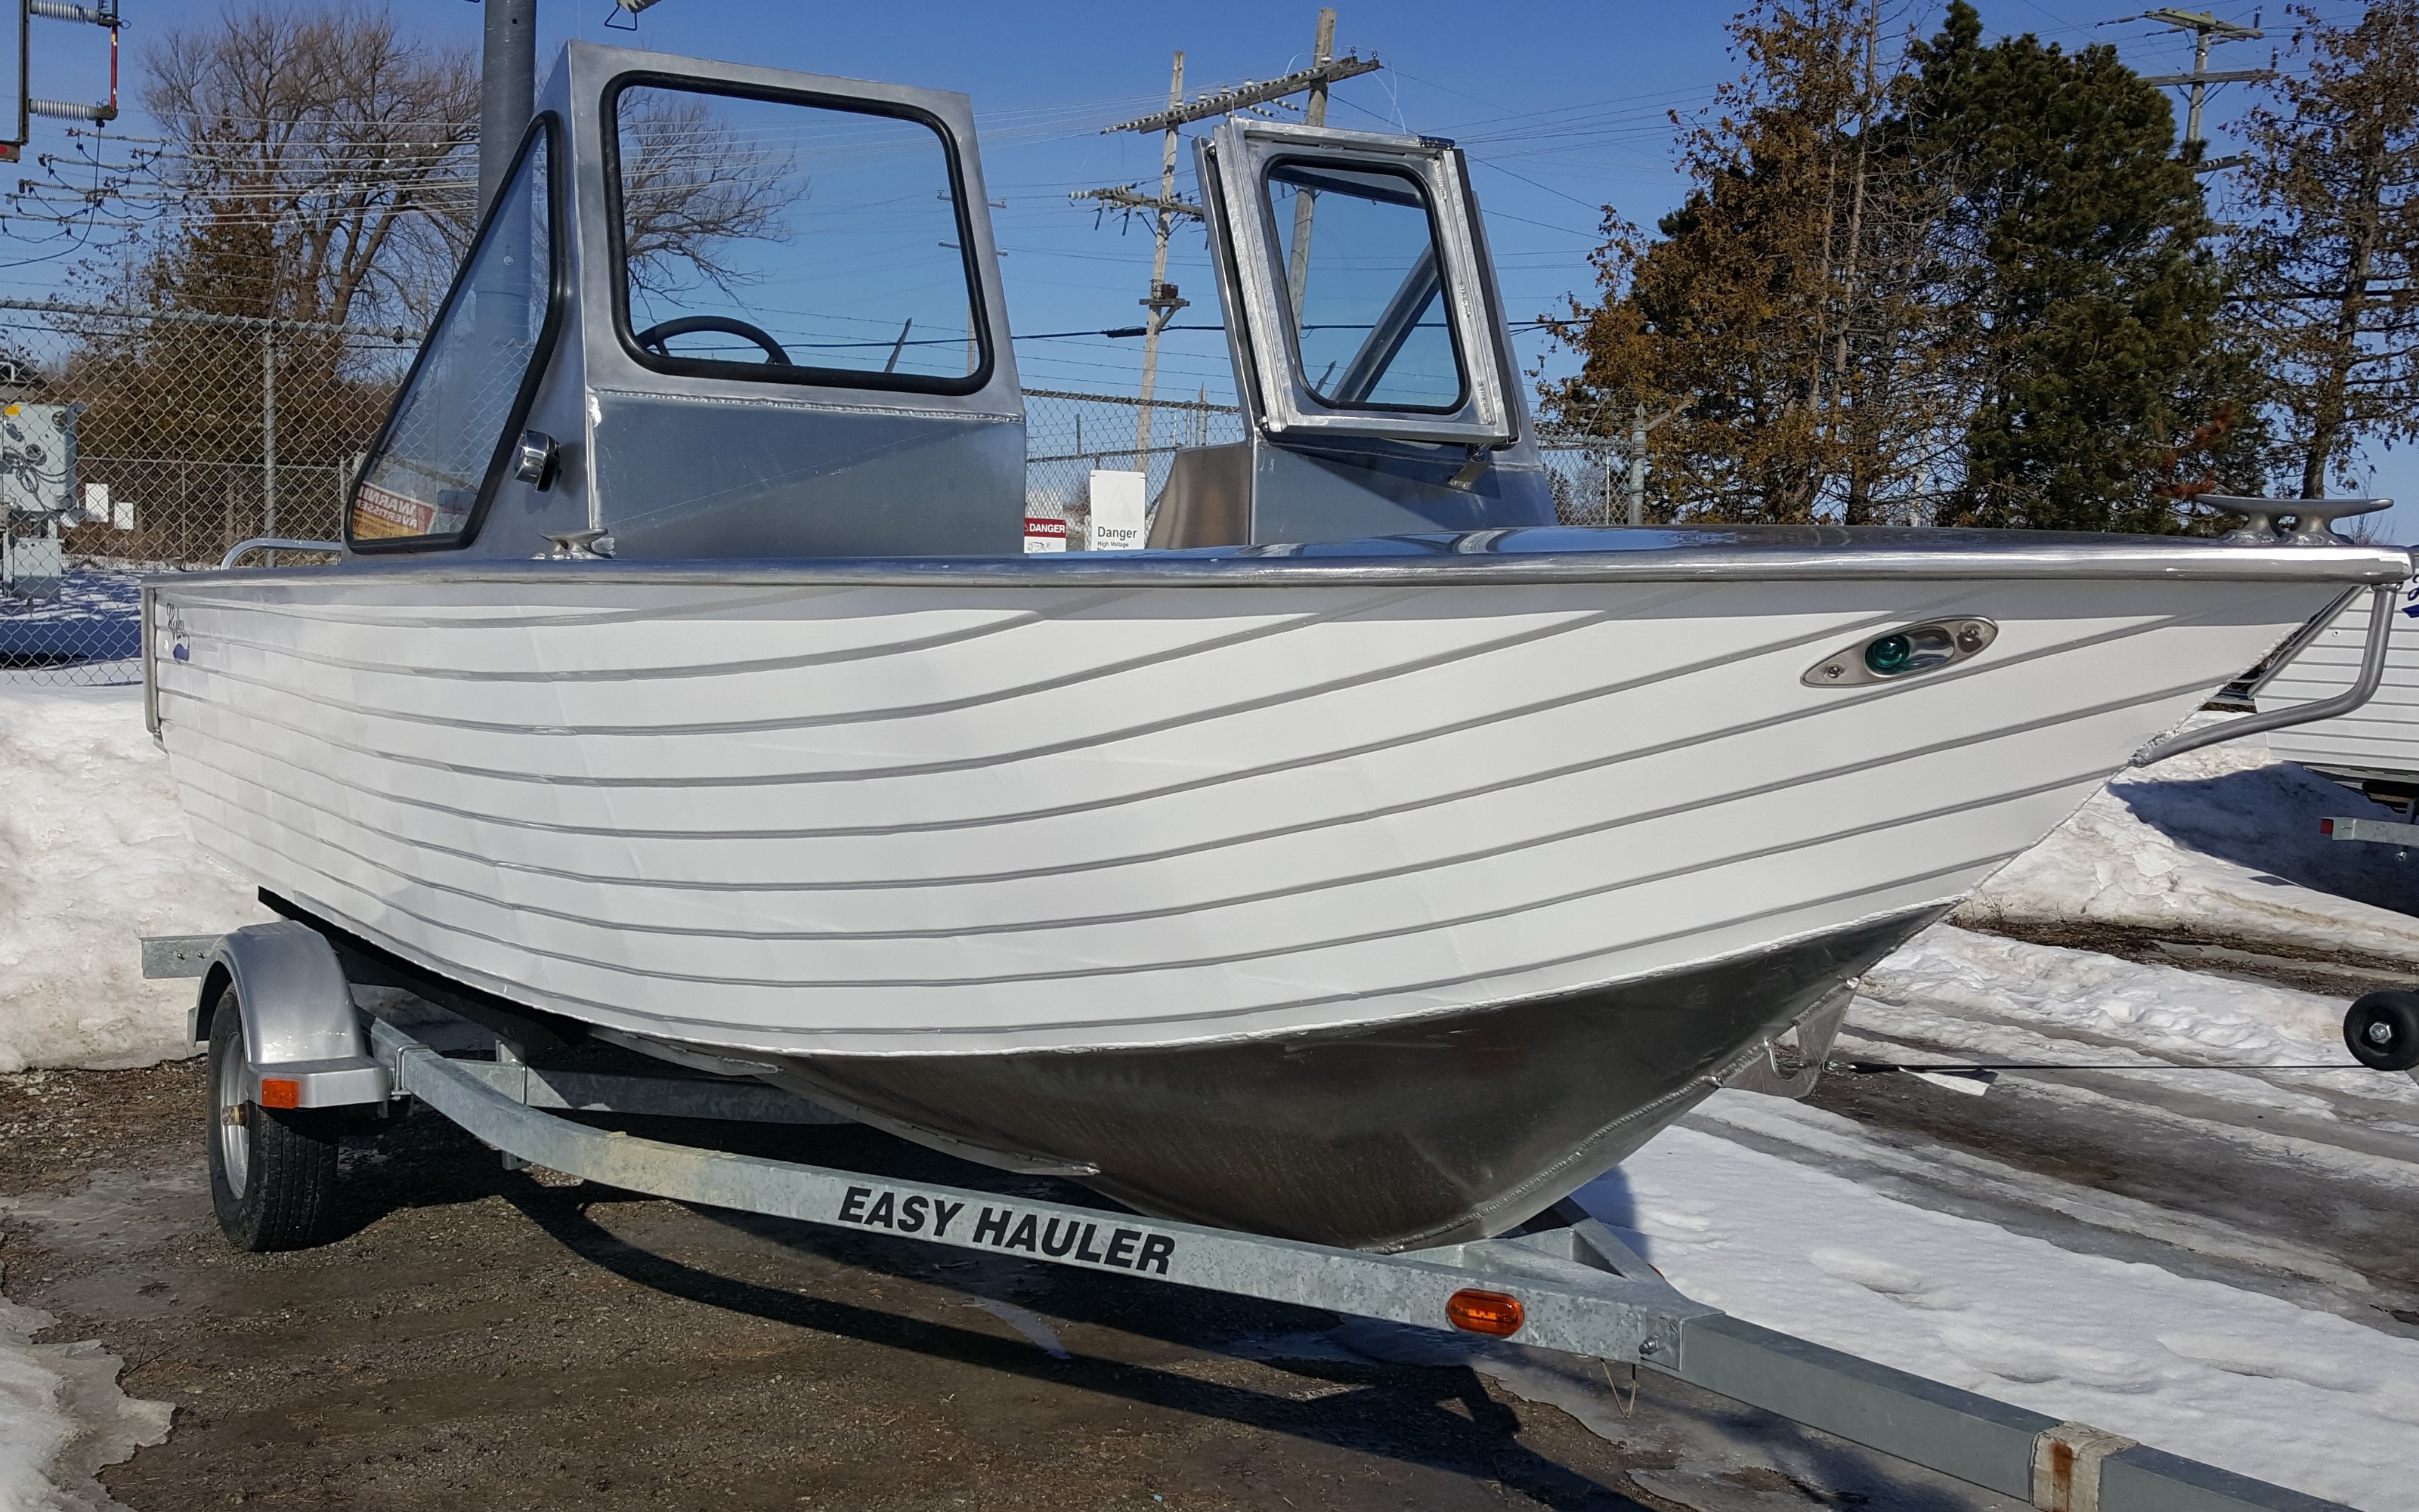 Boats for sale Canada, boats for sale, used boat sales, Fishing Boats For  Sale New 18' Aluminum Work/Ski/Fishing Boat - Apollo Duck